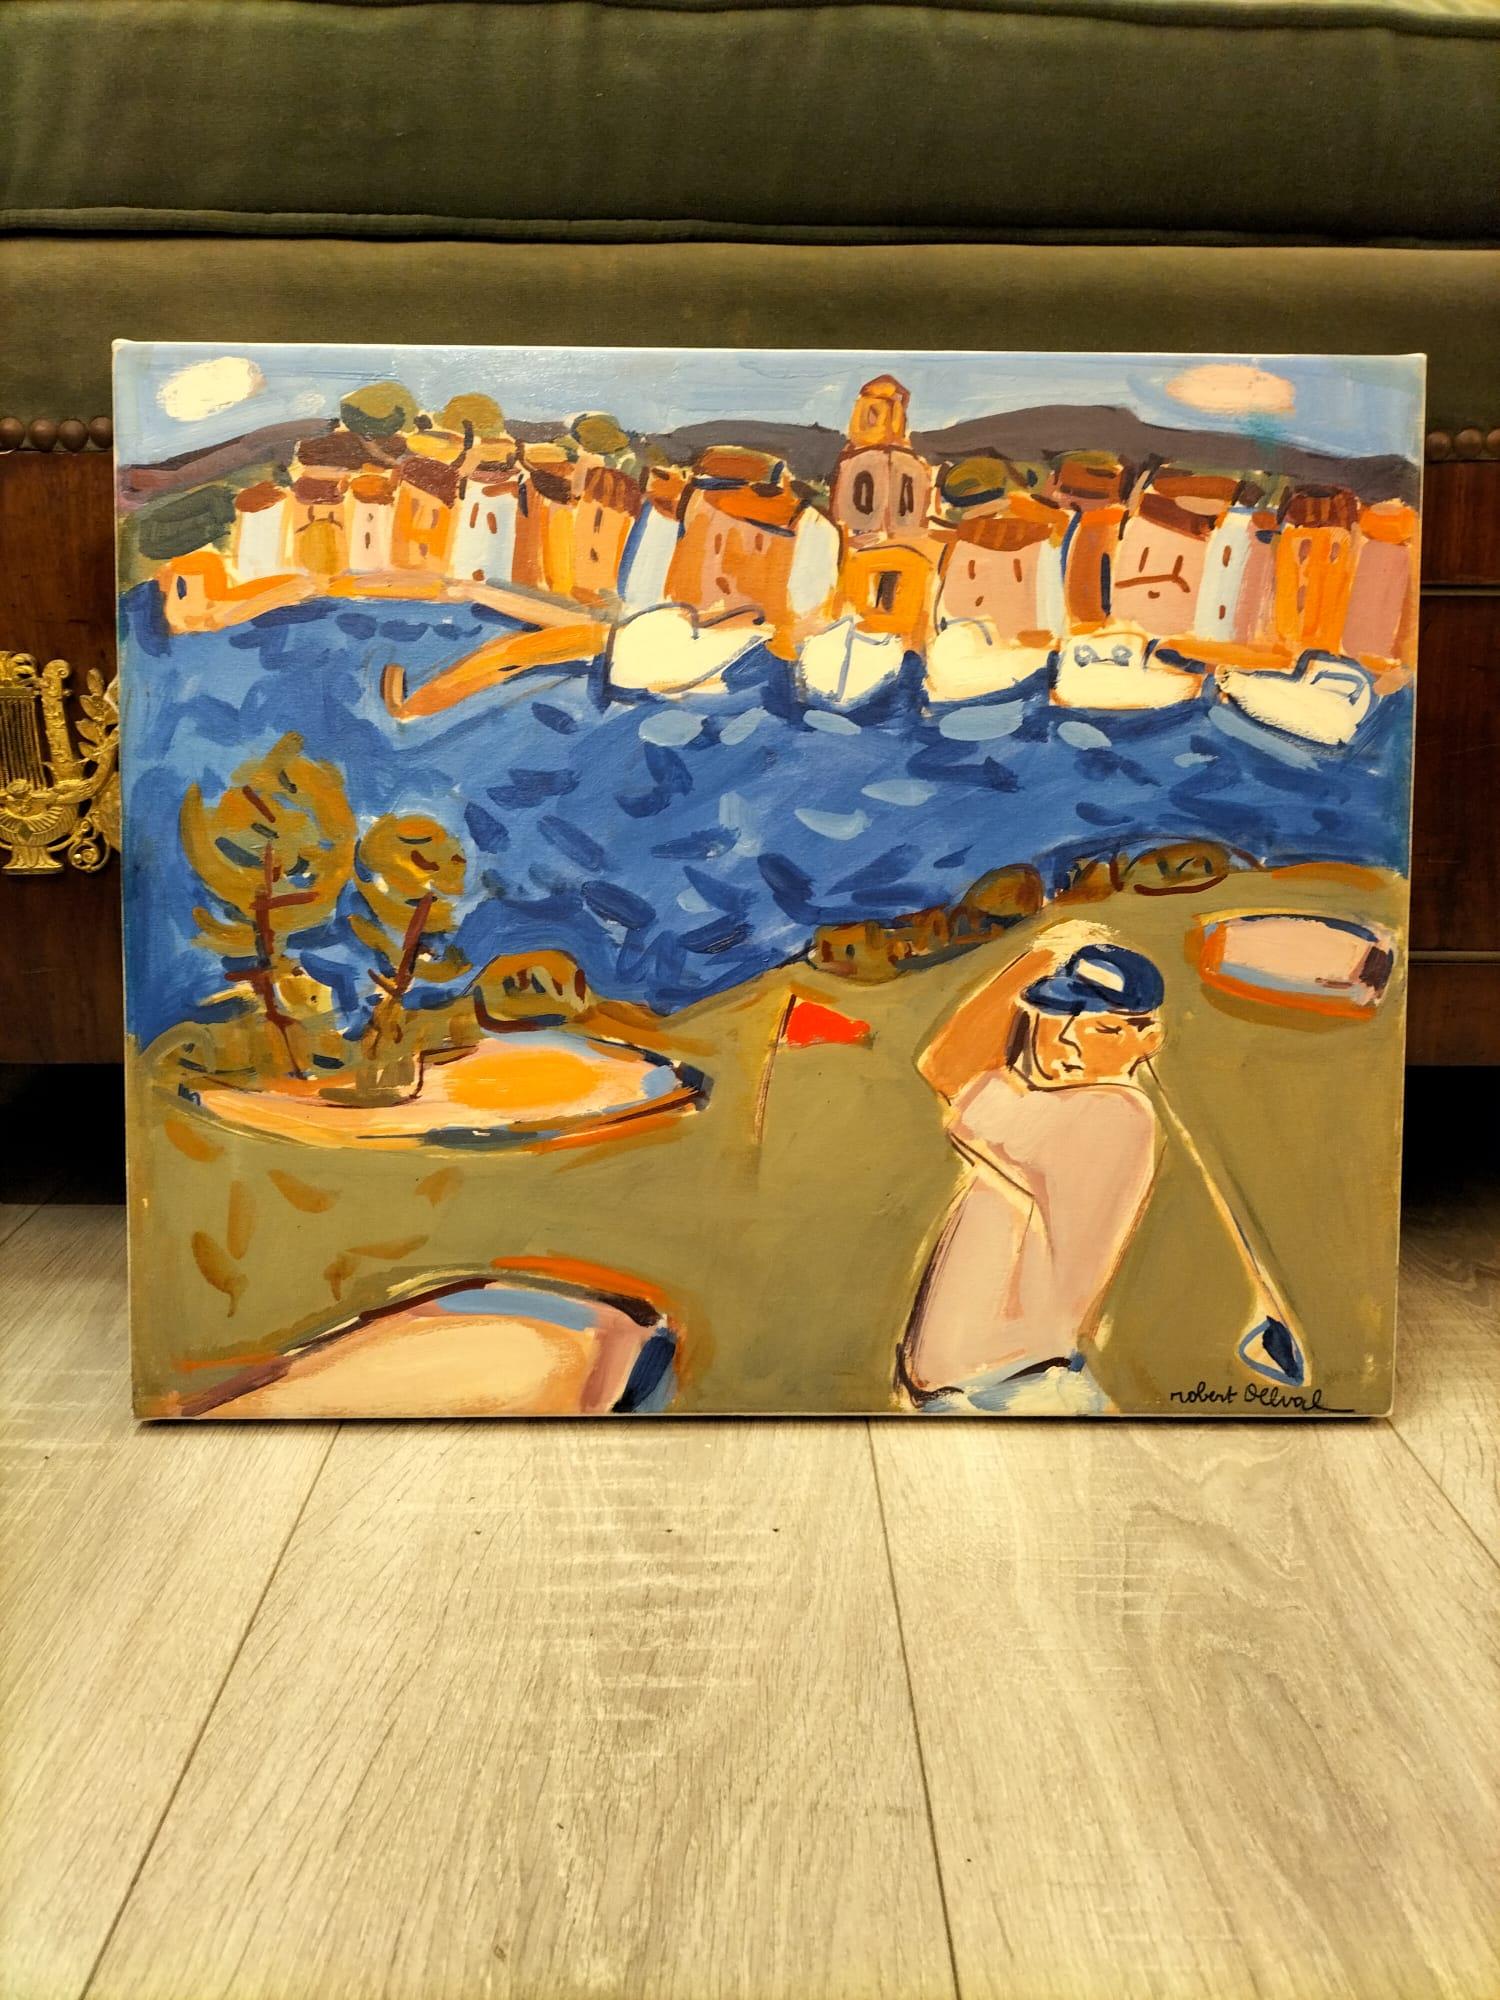 We present you with this wonderful artwork, titled 'Golf in Saint Tropez'. It is an oil painting on canvas and signed by the artist, Robert Delval (1934-). It dates back to 2007, making it a contemporary piece. The artist's playful use of colours,